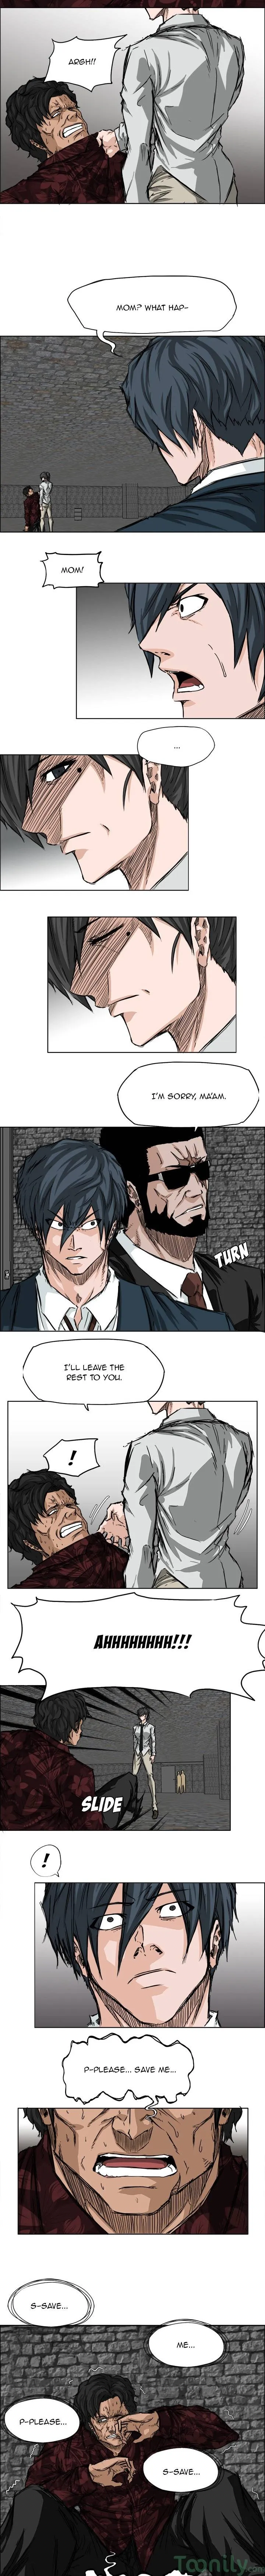 Boss in School Chapter 29 page 4